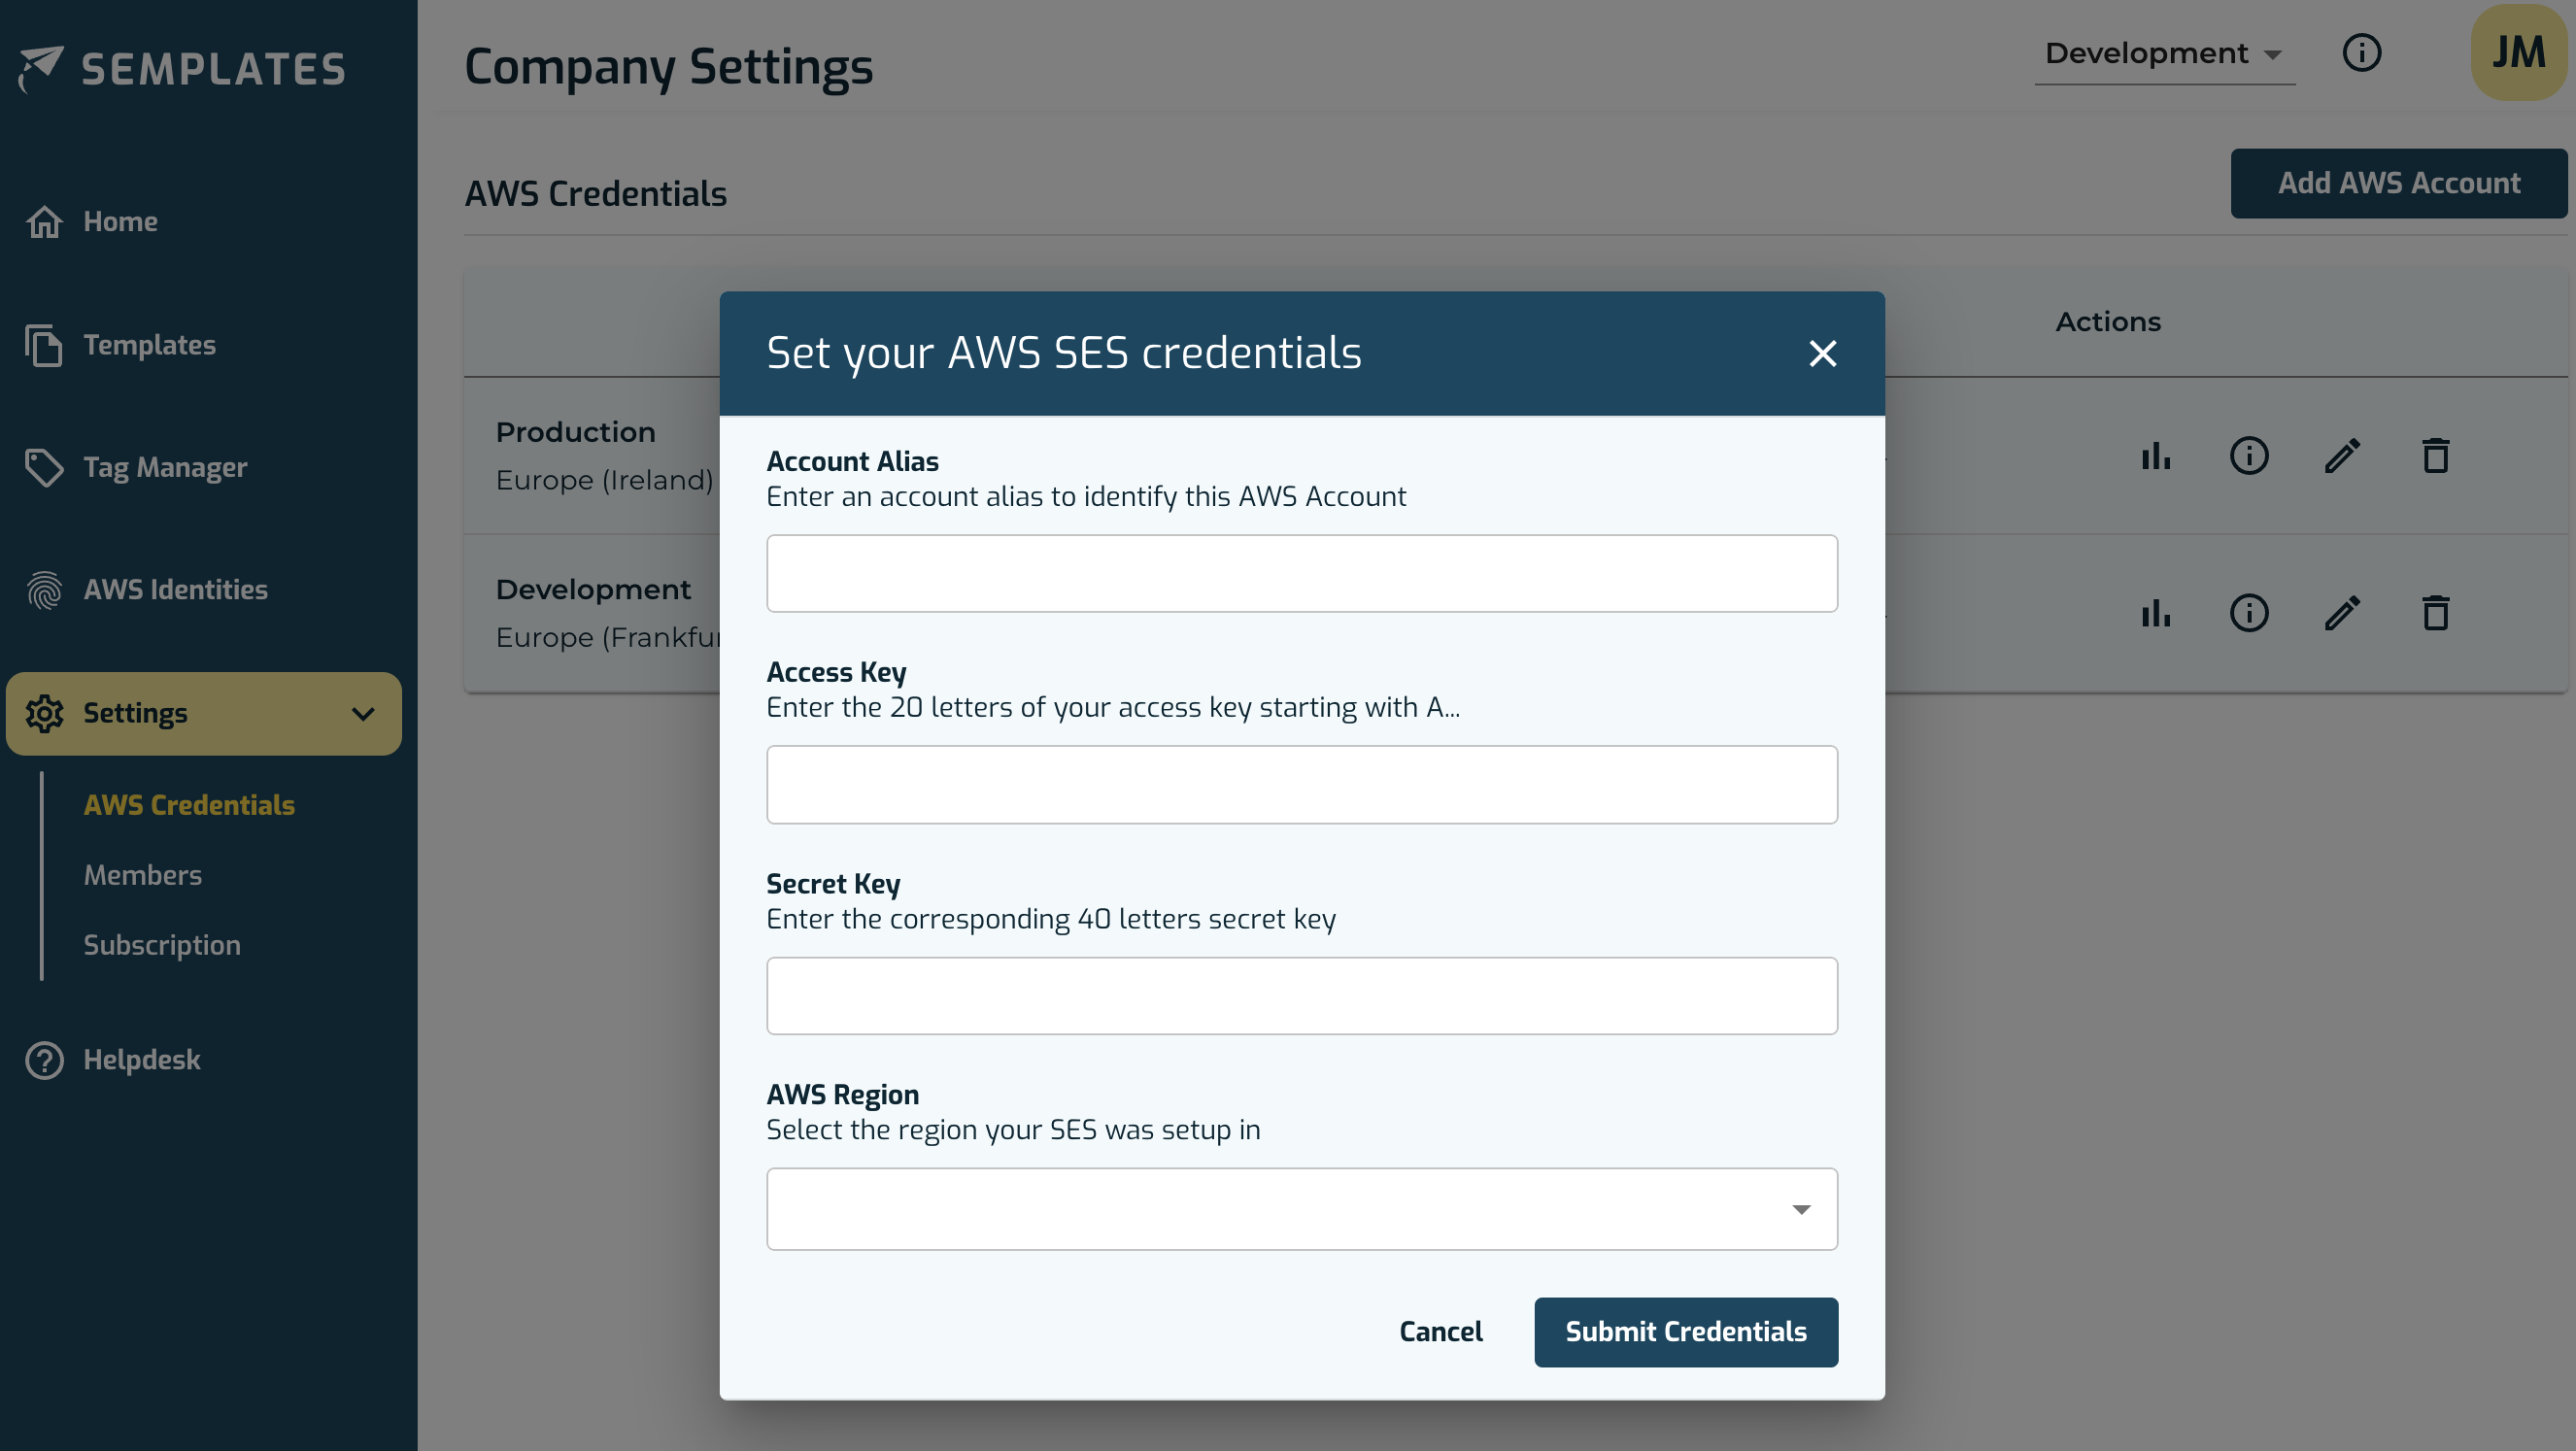 Dialog to connect AWS Account with Semplates